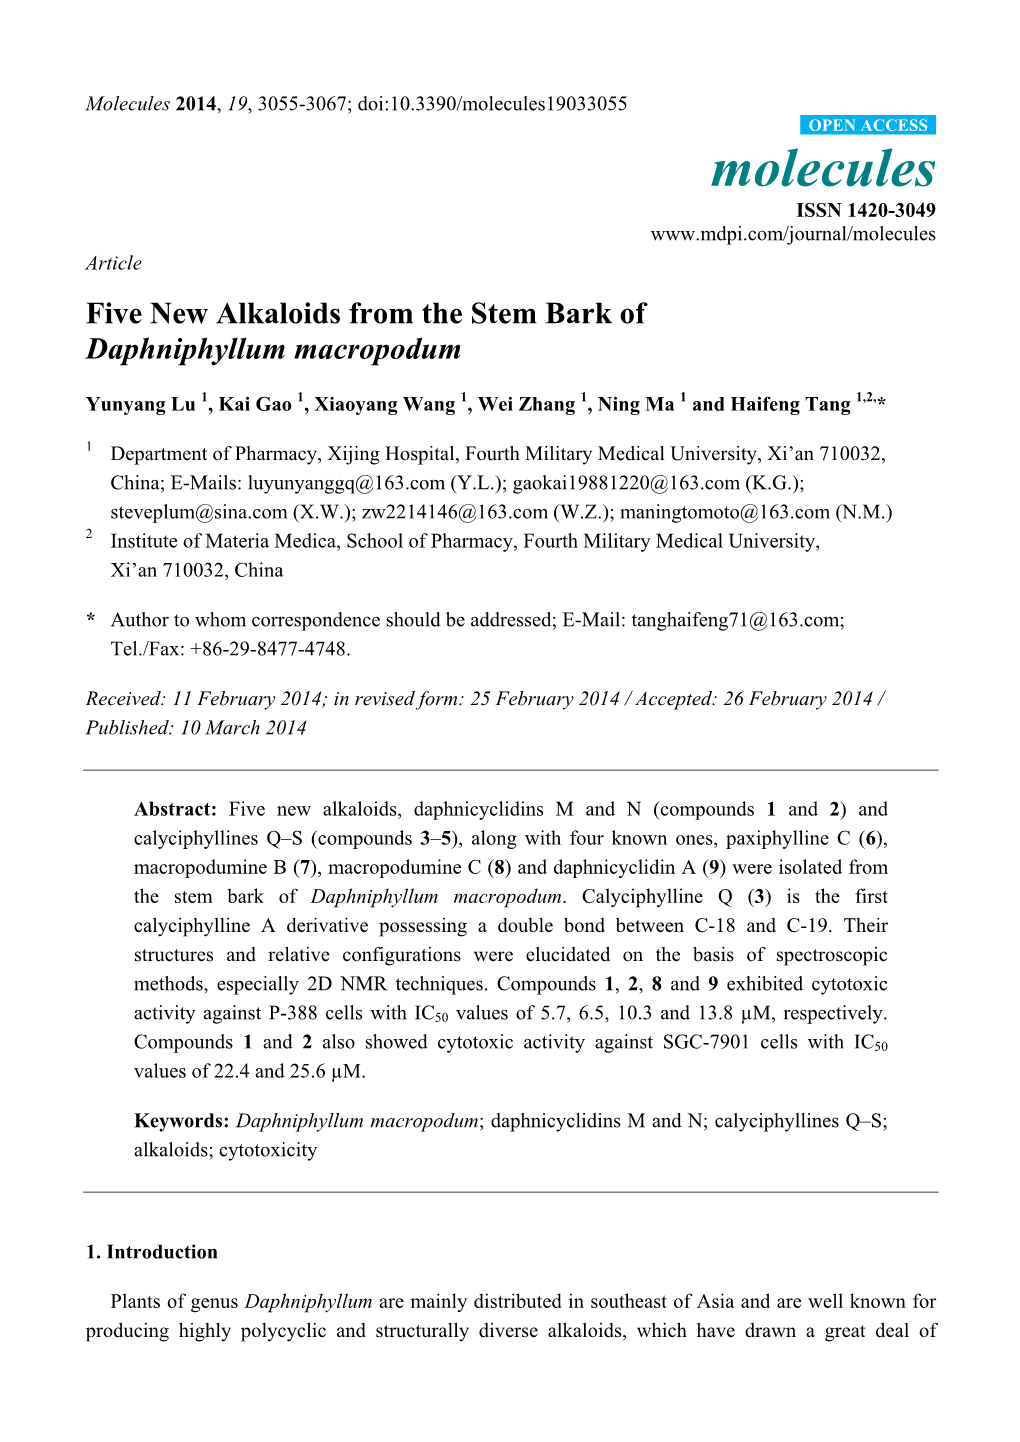 Five New Alkaloids from the Stem Bark of Daphniphyllum Macropodum